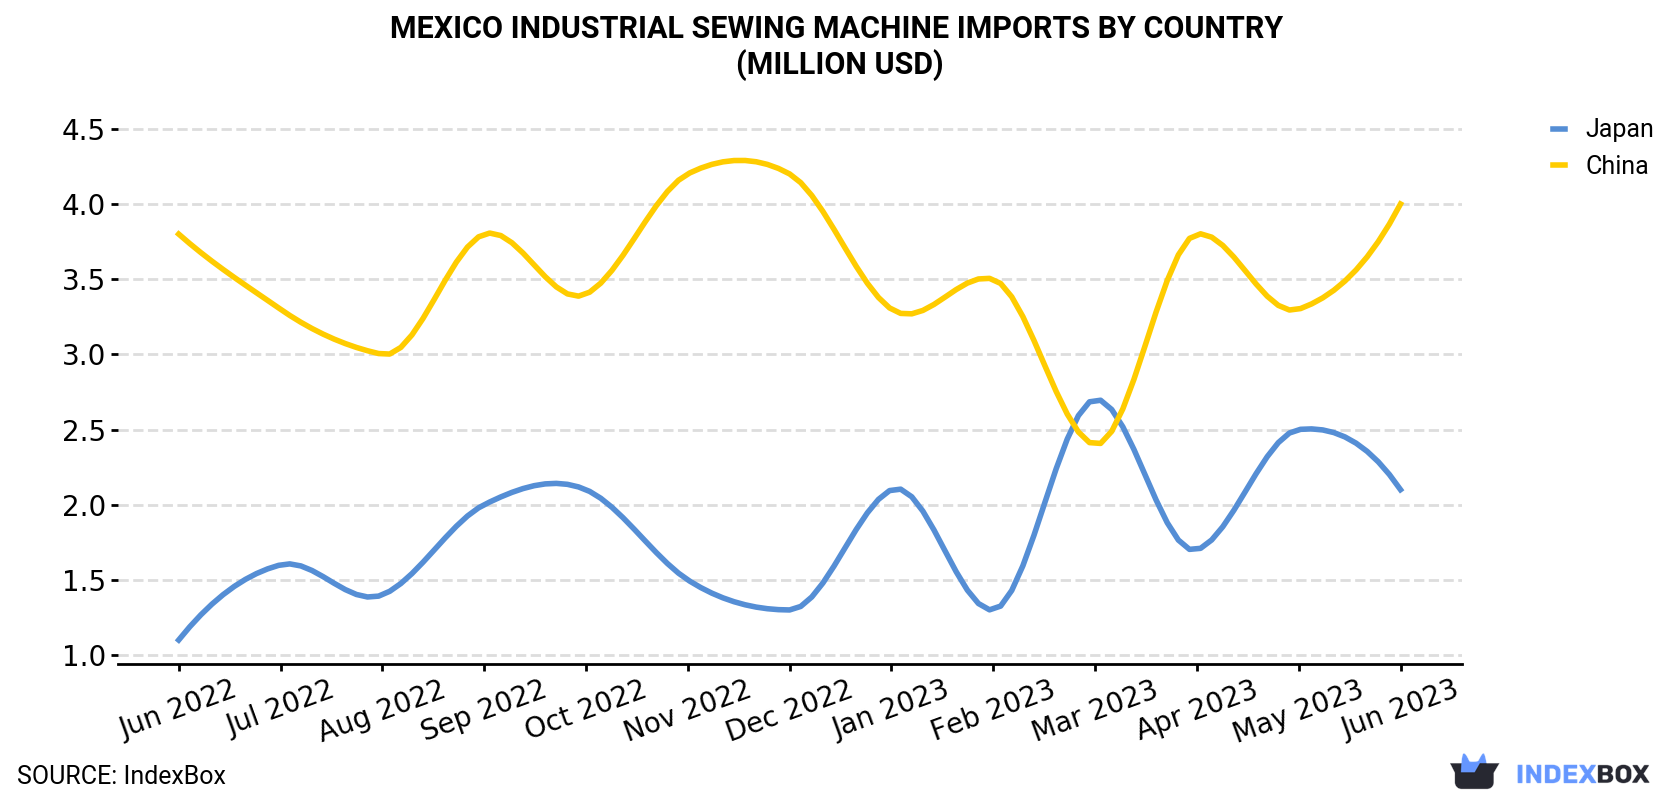 Mexico Industrial Sewing Machine Imports By Country (Million USD)